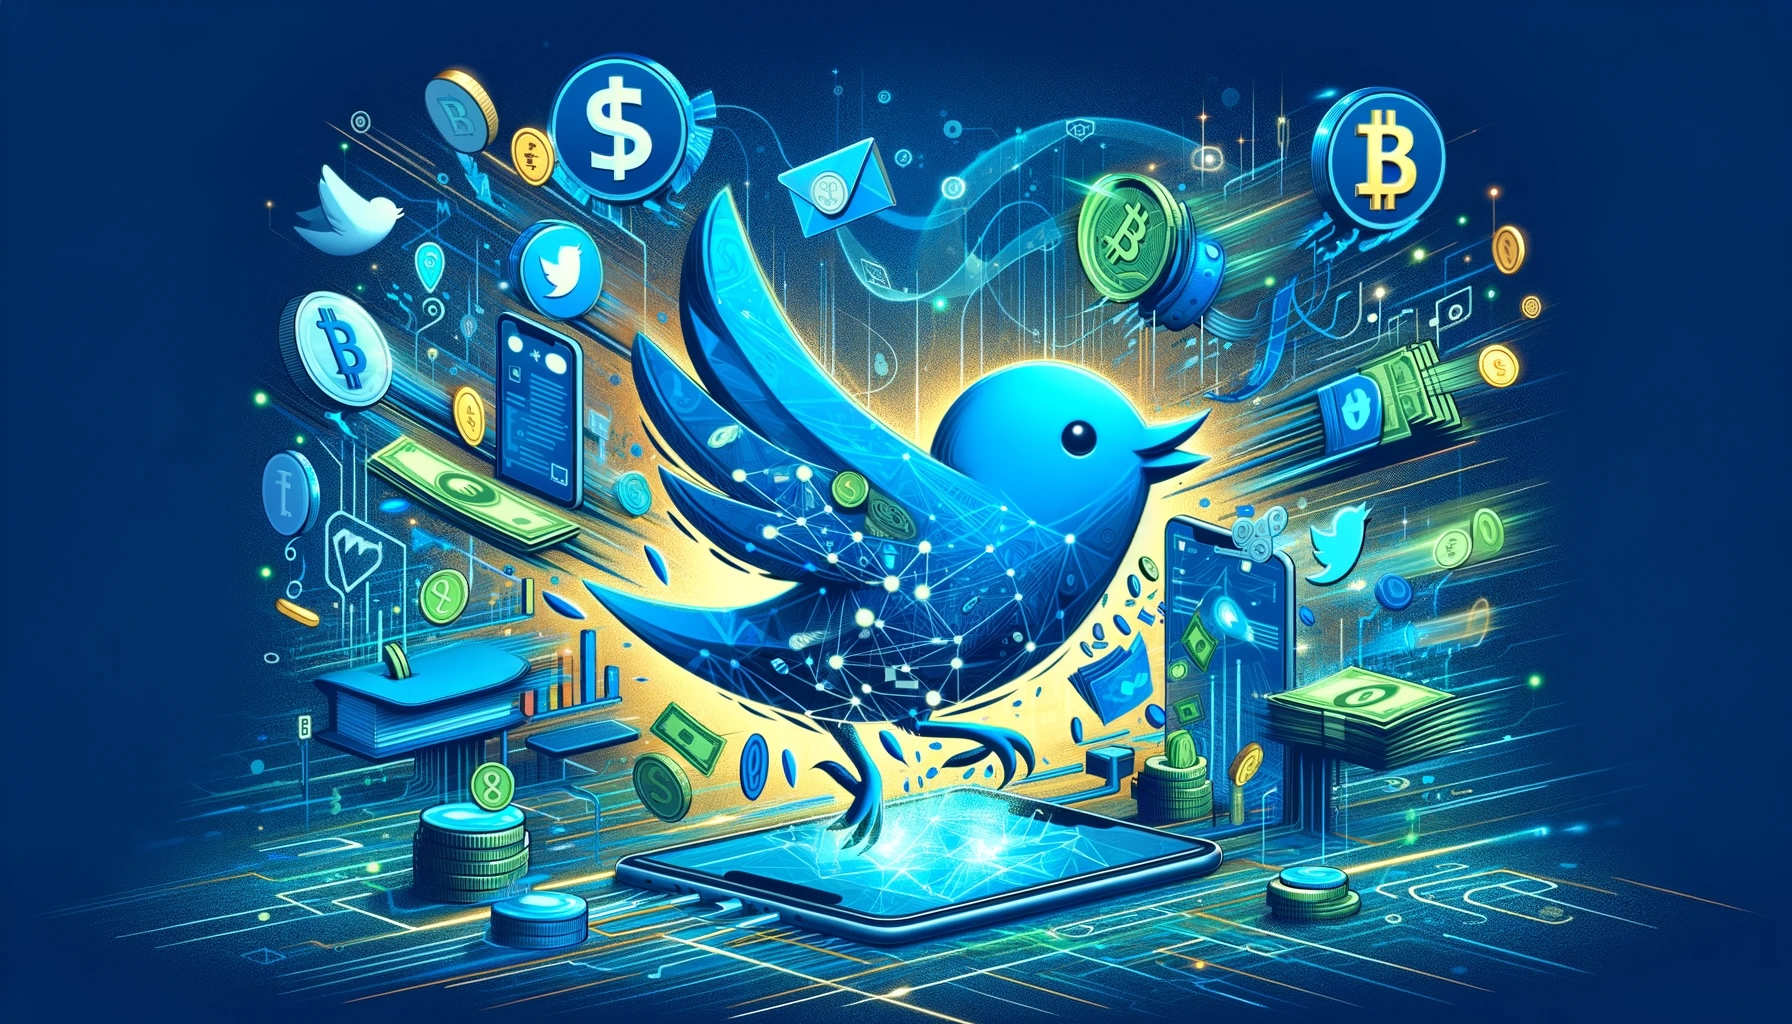 1703312415 DALL·E 2023 12 22 17.19.42 A cover image in landscape orientation for a tech publication depicting a giant blue bird similar in style to the Twitter logo acting as a money tr